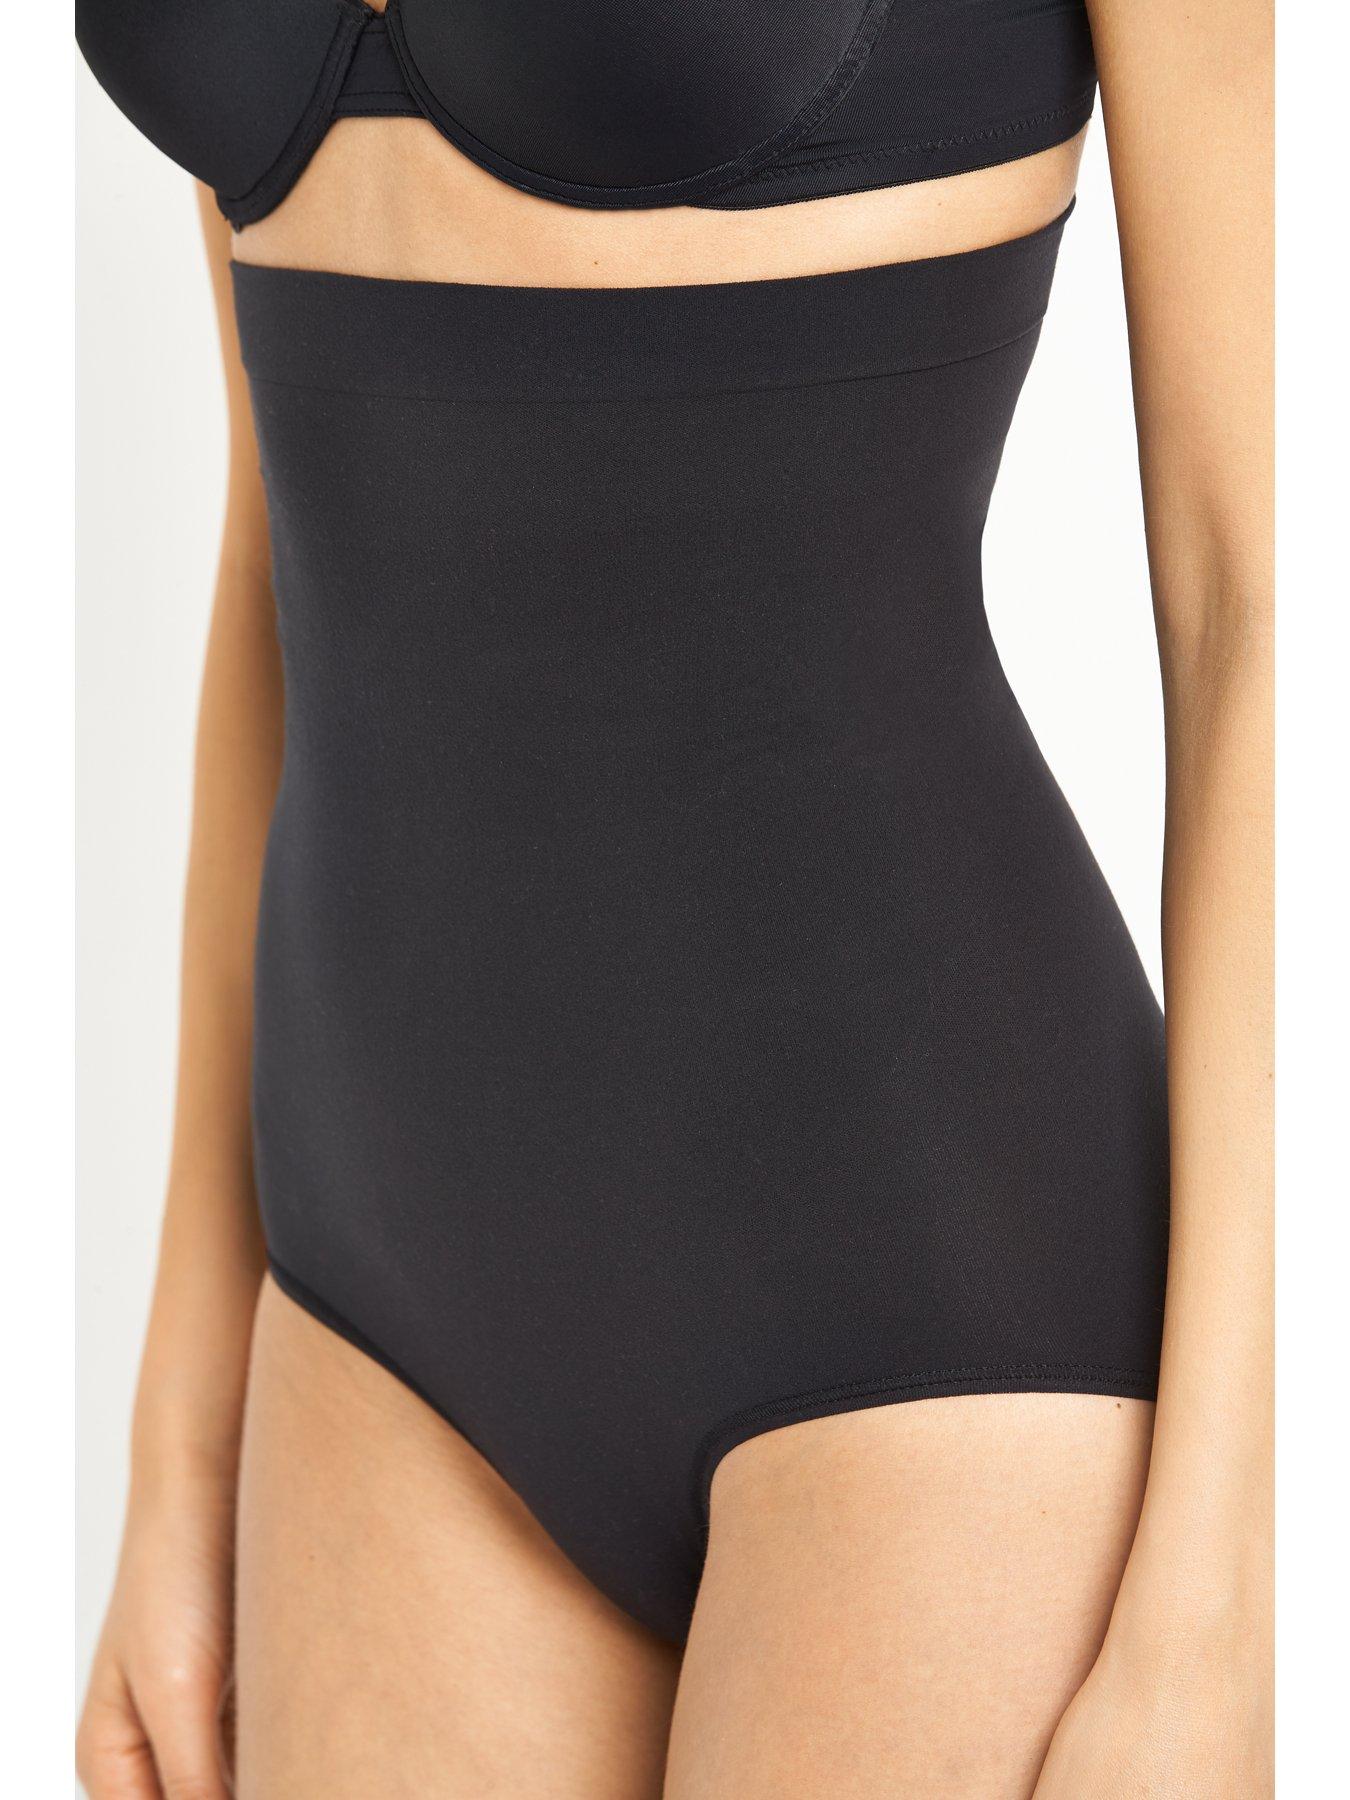 Miraclesuit® Sexy Sheer Shaping Bodybriefer - Black